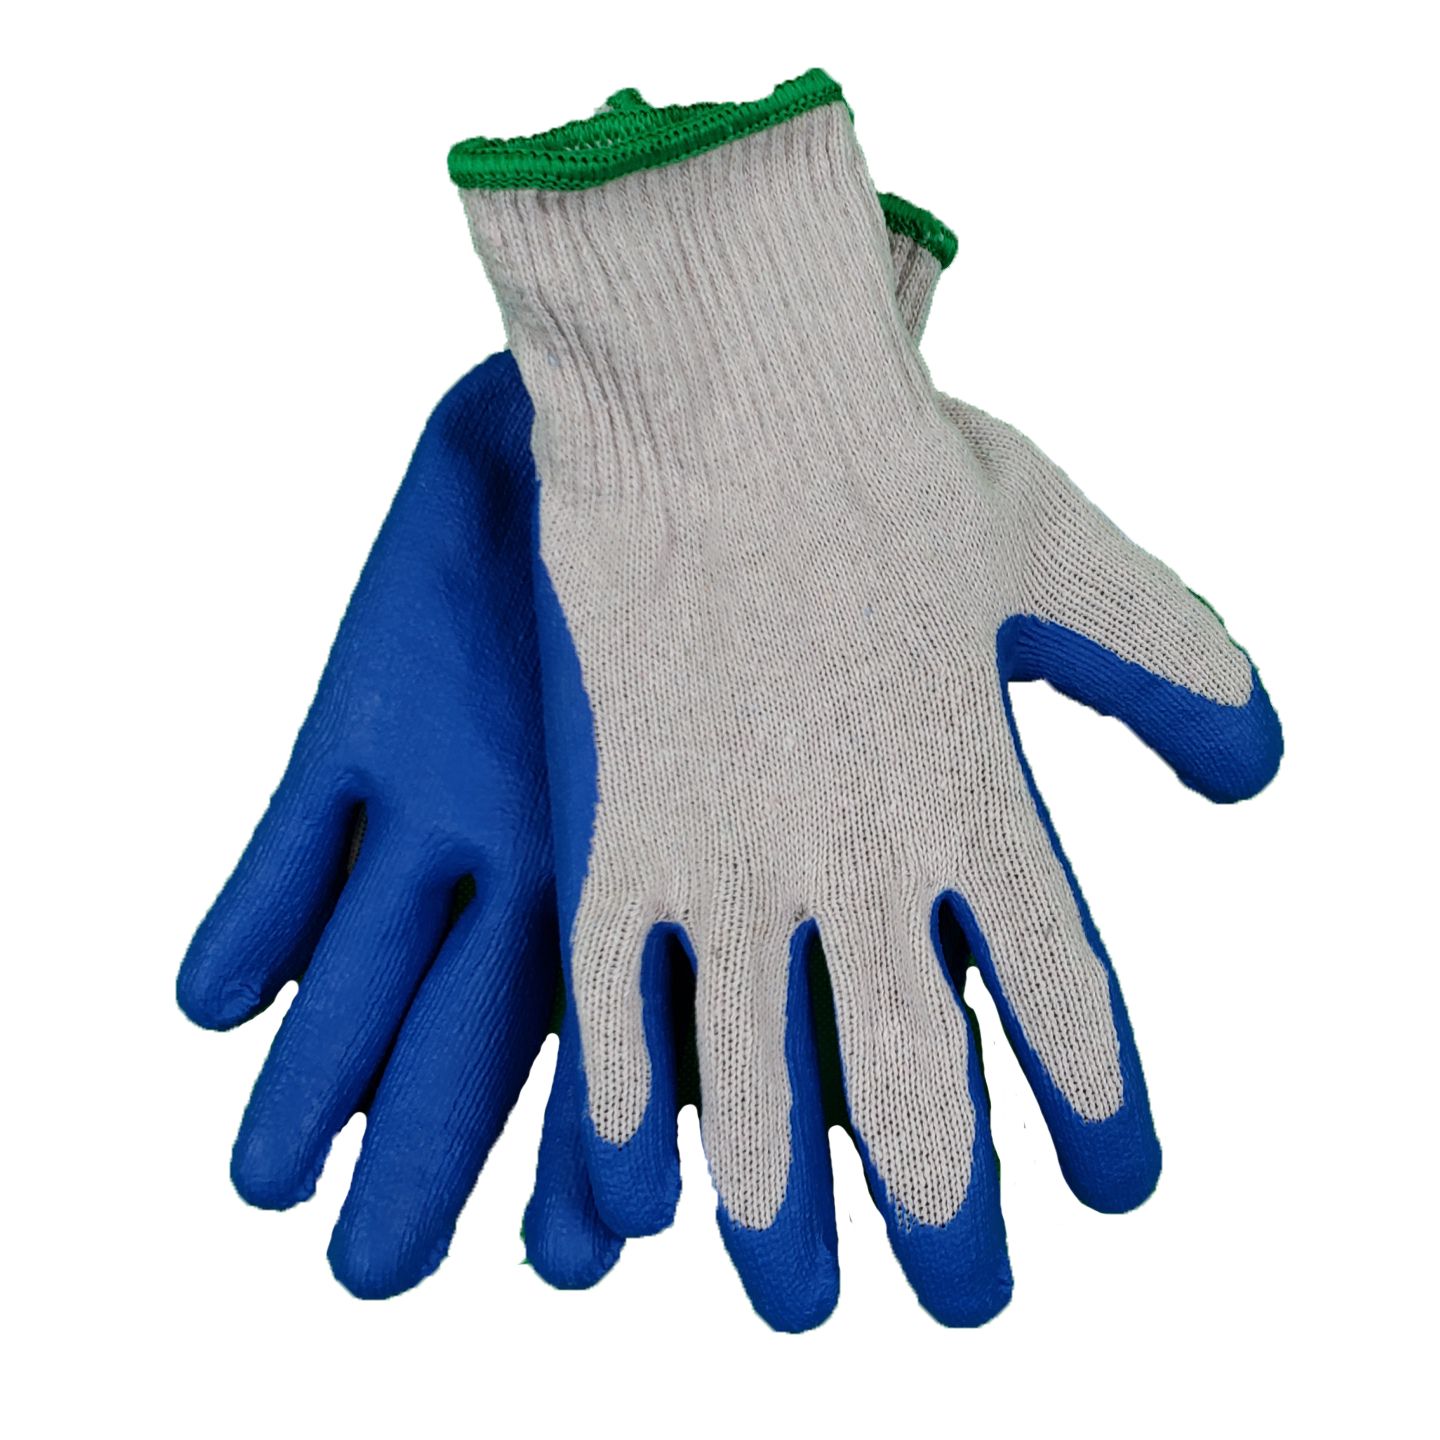 AcryLabs X-Large Work Gloves with Blue Palm Grip